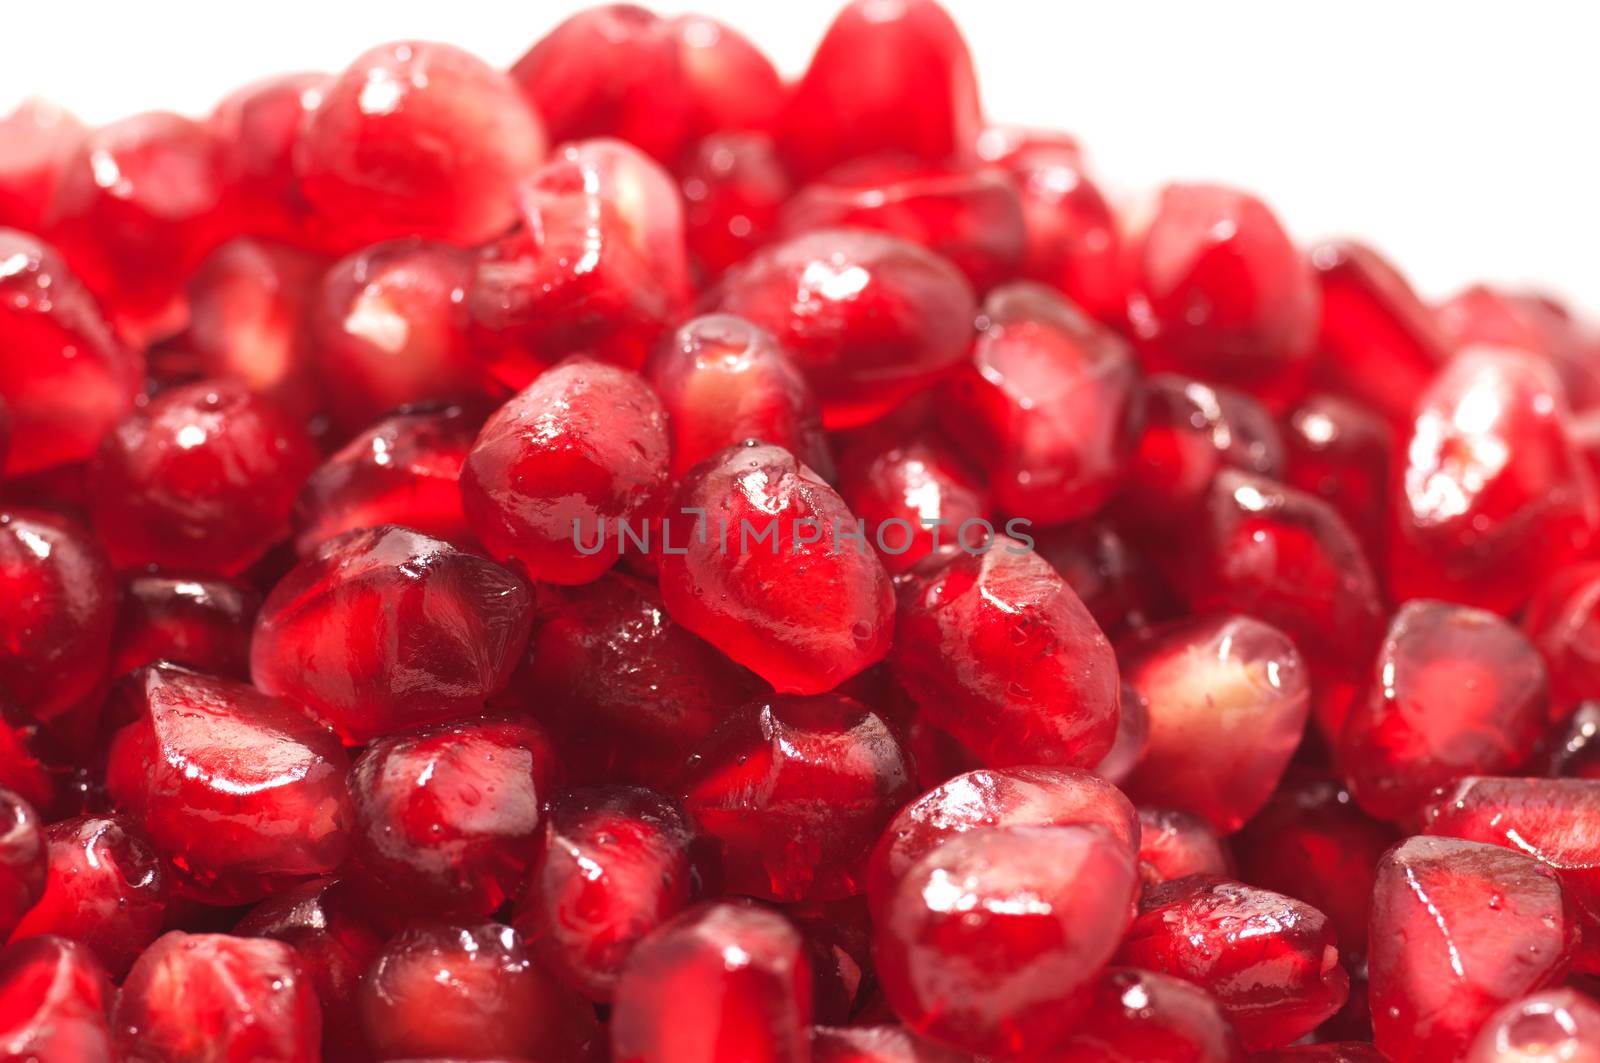 Pomegranate seeds close-up  by daoleduc